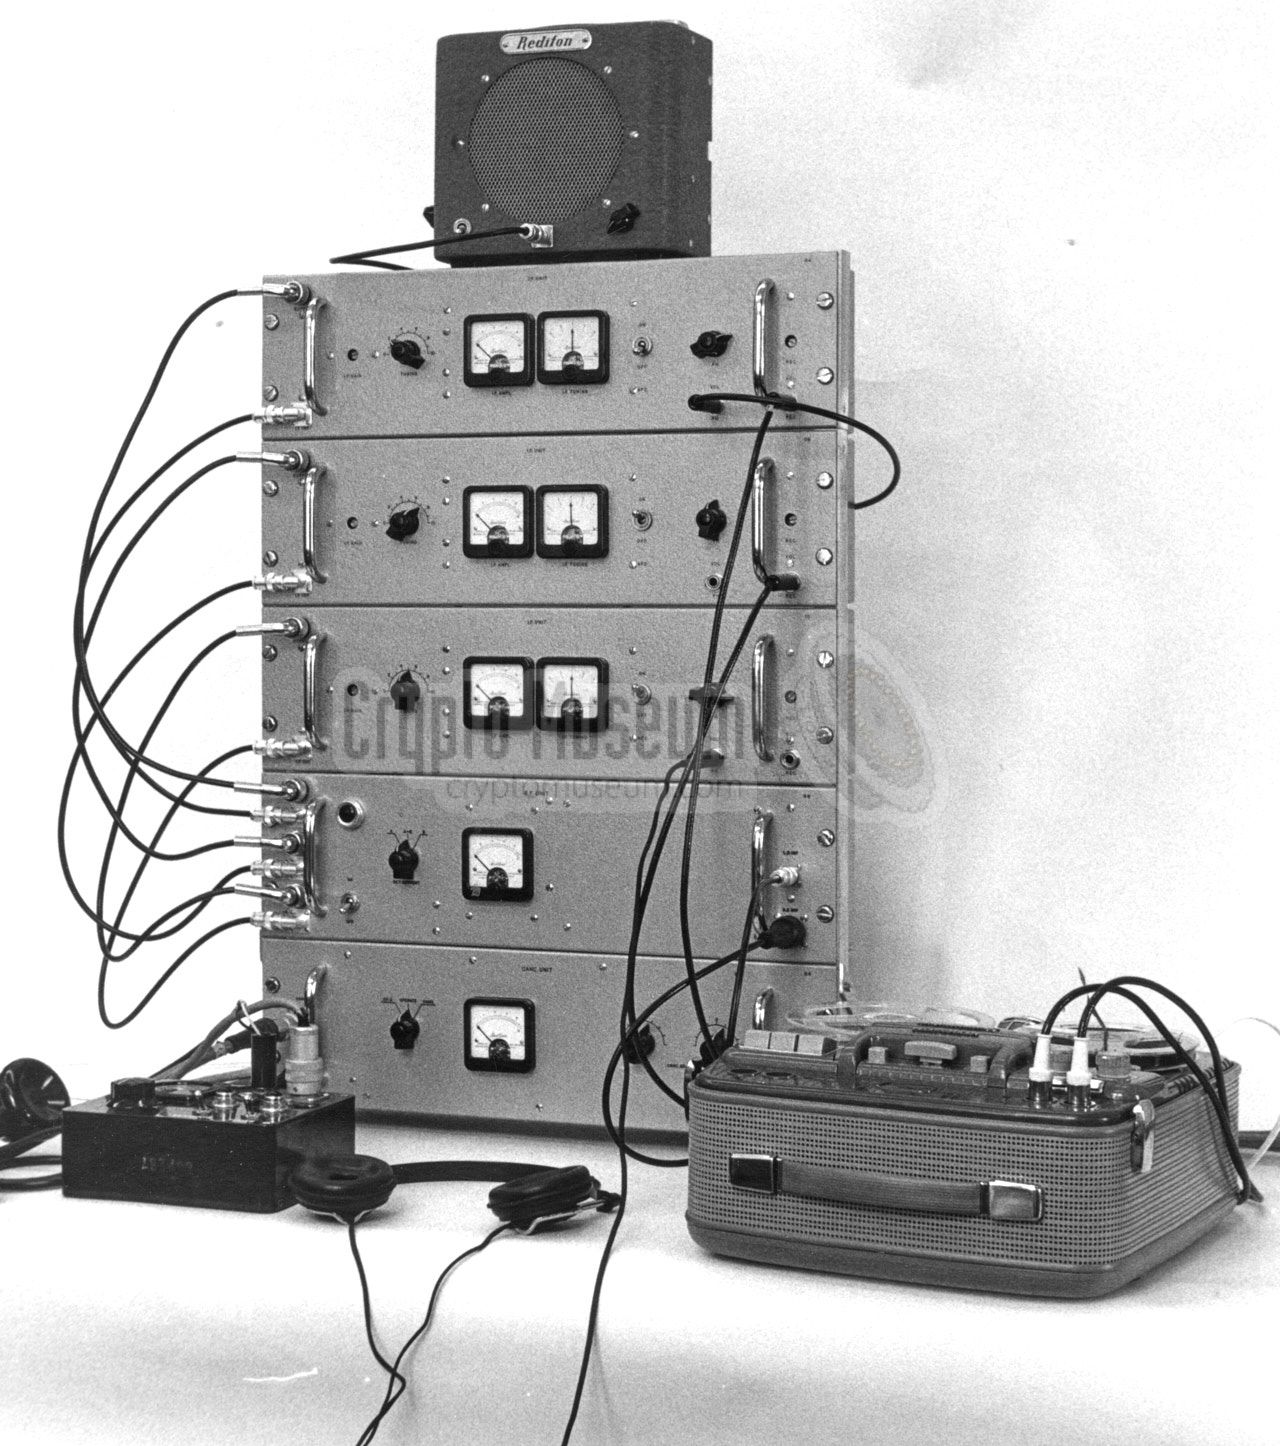 EC V receiver. At the front left is the remote control box of the transmitter